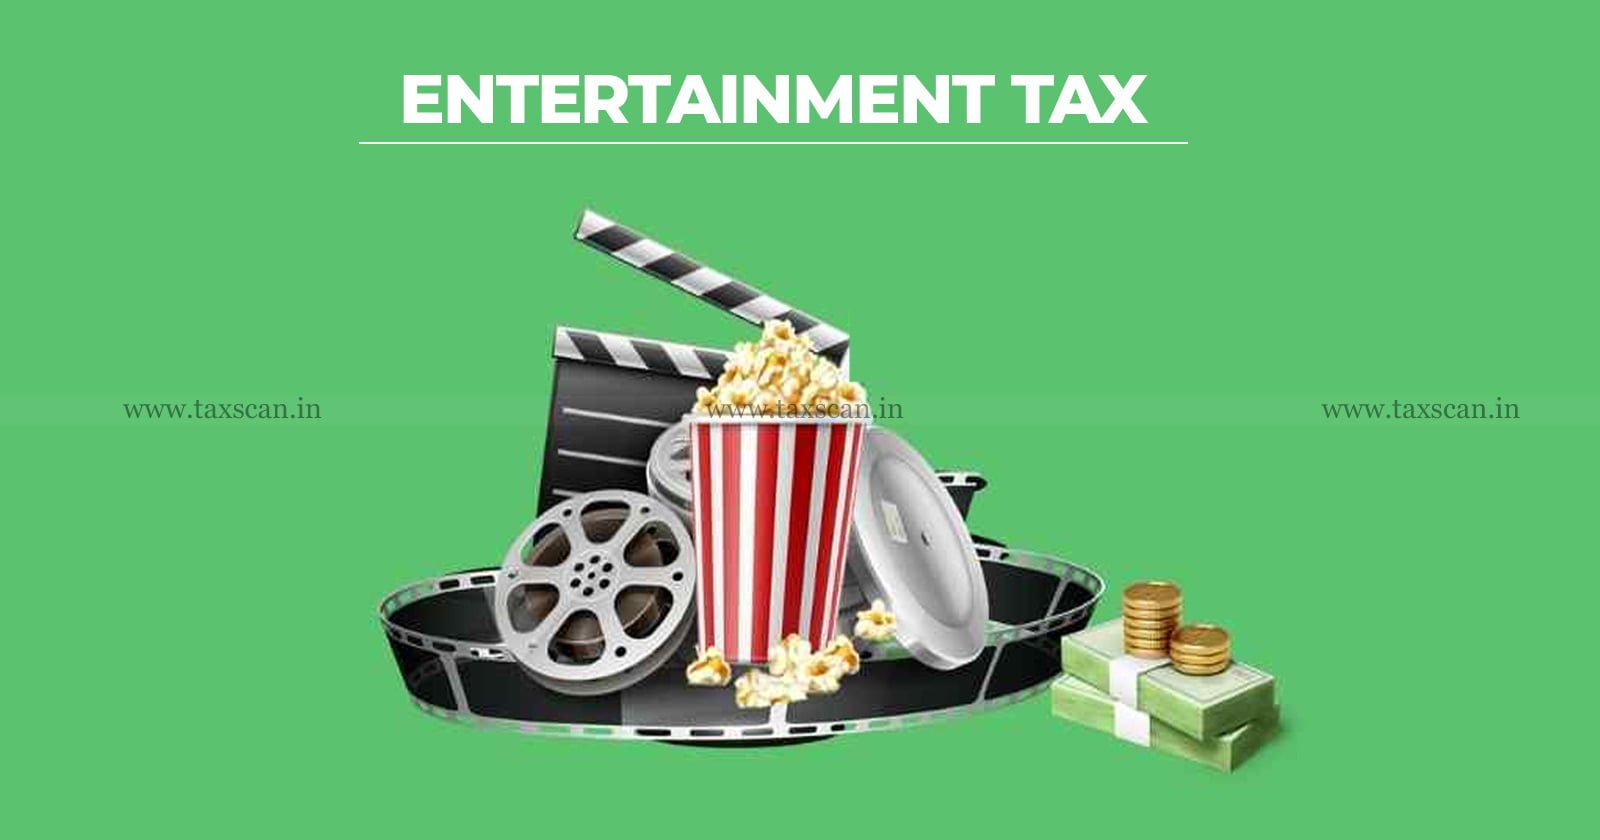 Entertainment Tax - Entertainment Tax collected - Commercial Tax Officers - Bihar Entertainment Tax Act - Entertainment Tax Act - ultravires of 101st Amendment - 101st Amendment - Amendment - Patna High Court - taxscan